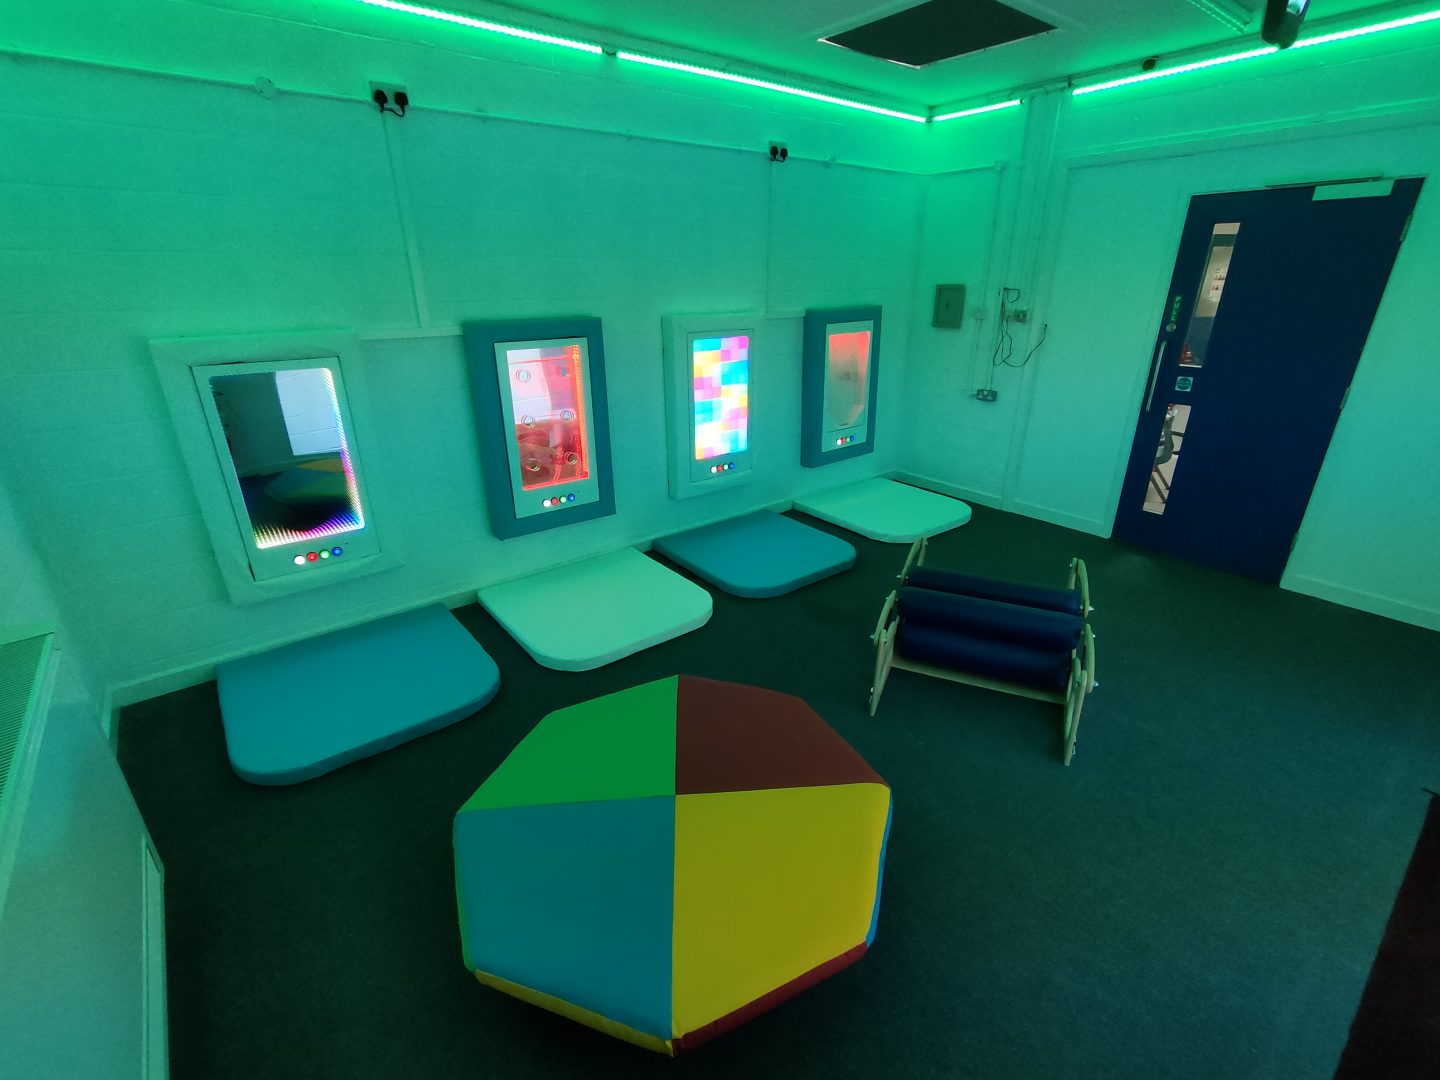 A well-equipped sensory room installed within a school environment, featuring interactive sensory panels such as the Snow-Scape interactive snow fall panel, The Infinity-Glow panel for infinite colourful reflections, The Spectra-Sync a multi mode interactive sound and light panel and a calming, colourful bubble wall. The Sensory room also features aspects of sensory integration with the soft padded rocker roller and the sensory body roller. Mood lighting around the Sensory Room is controlled by a soft padded cube.